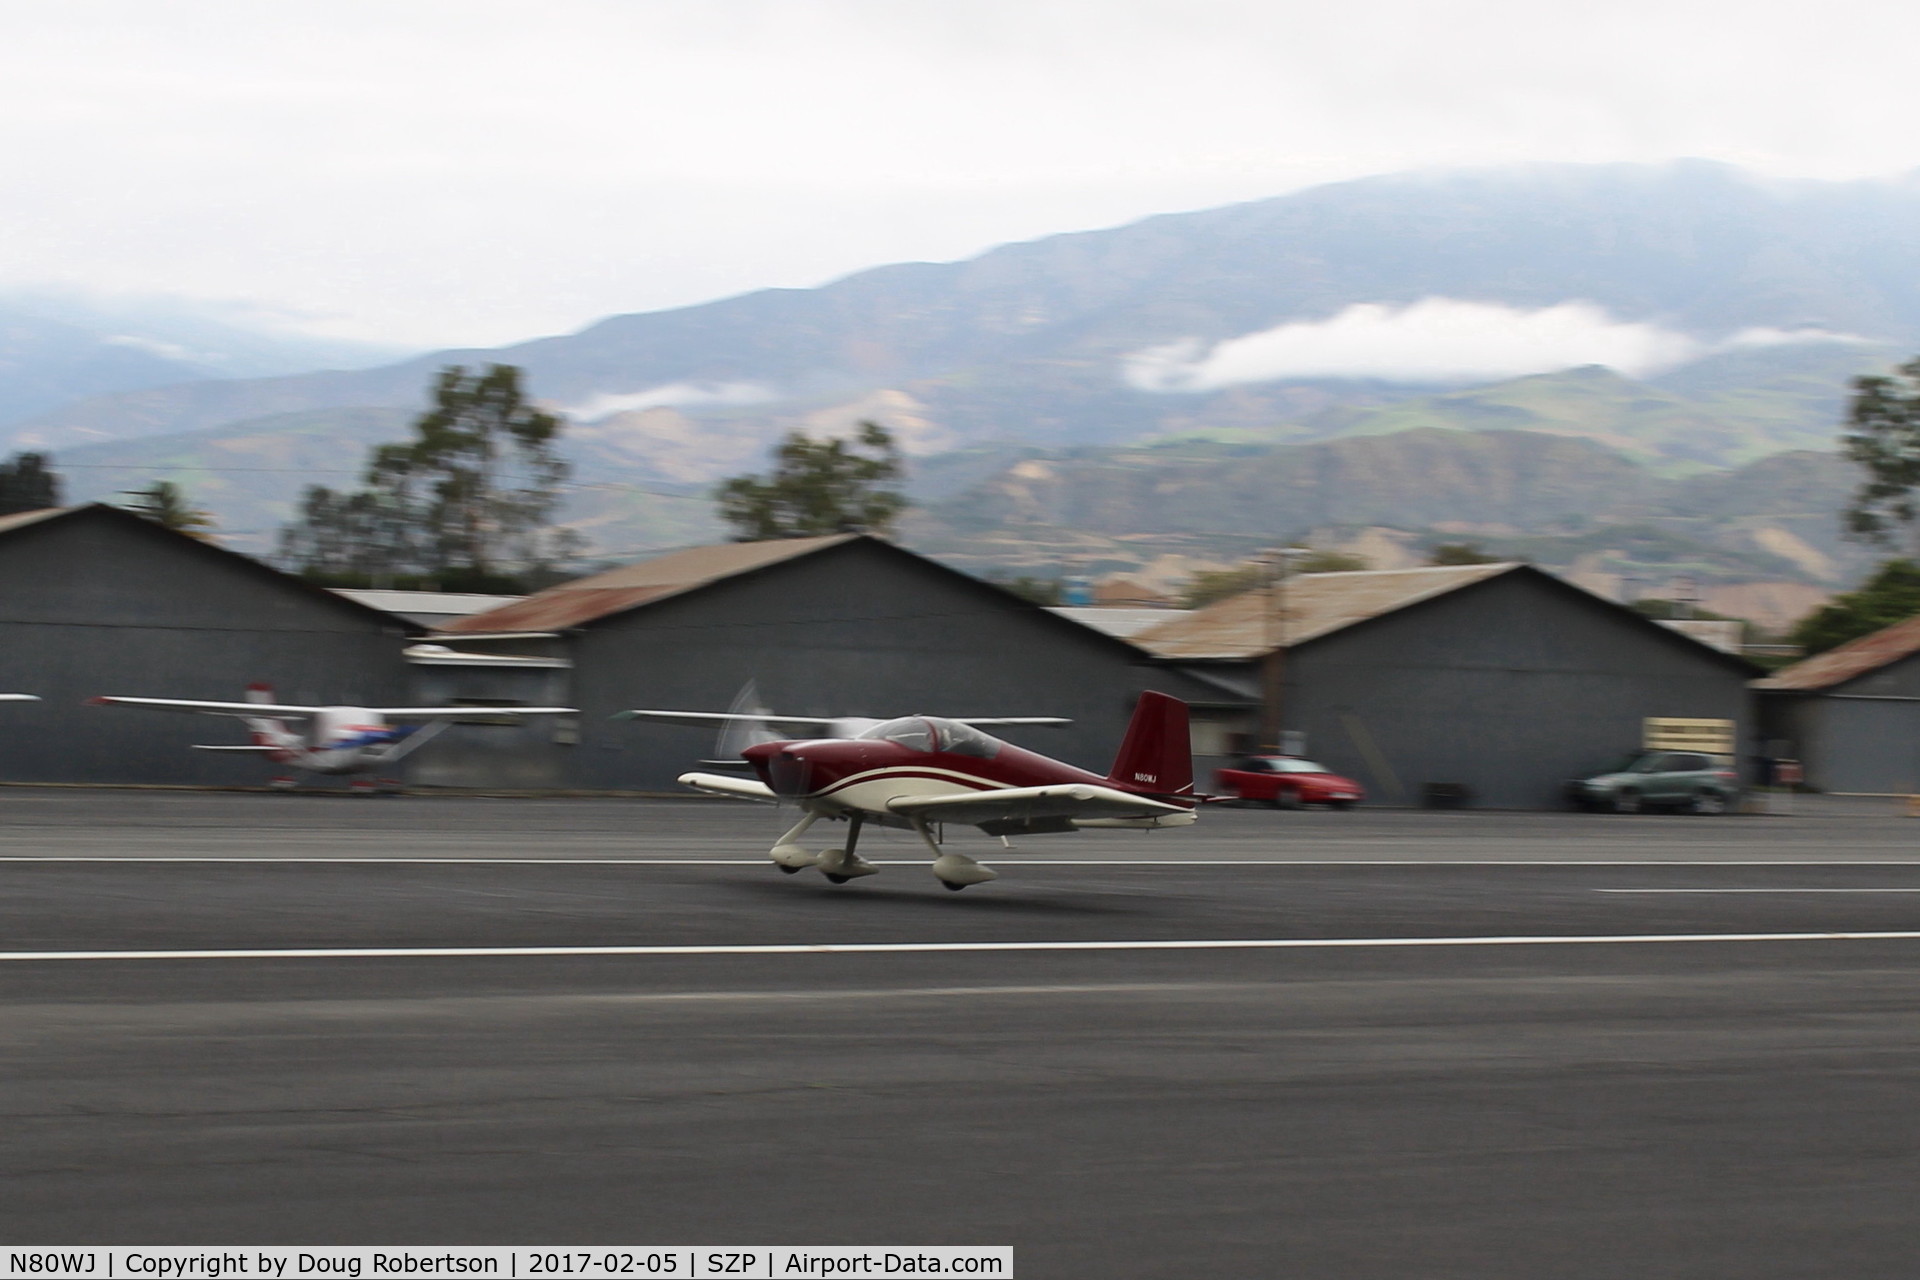 N80WJ, 2014 Vans RV-7A C/N 72575, 2015 Richmond VAN's RV-7A, ECI TITAN IOX-360-A4H1N 191 Hp, another landing Rwy 22